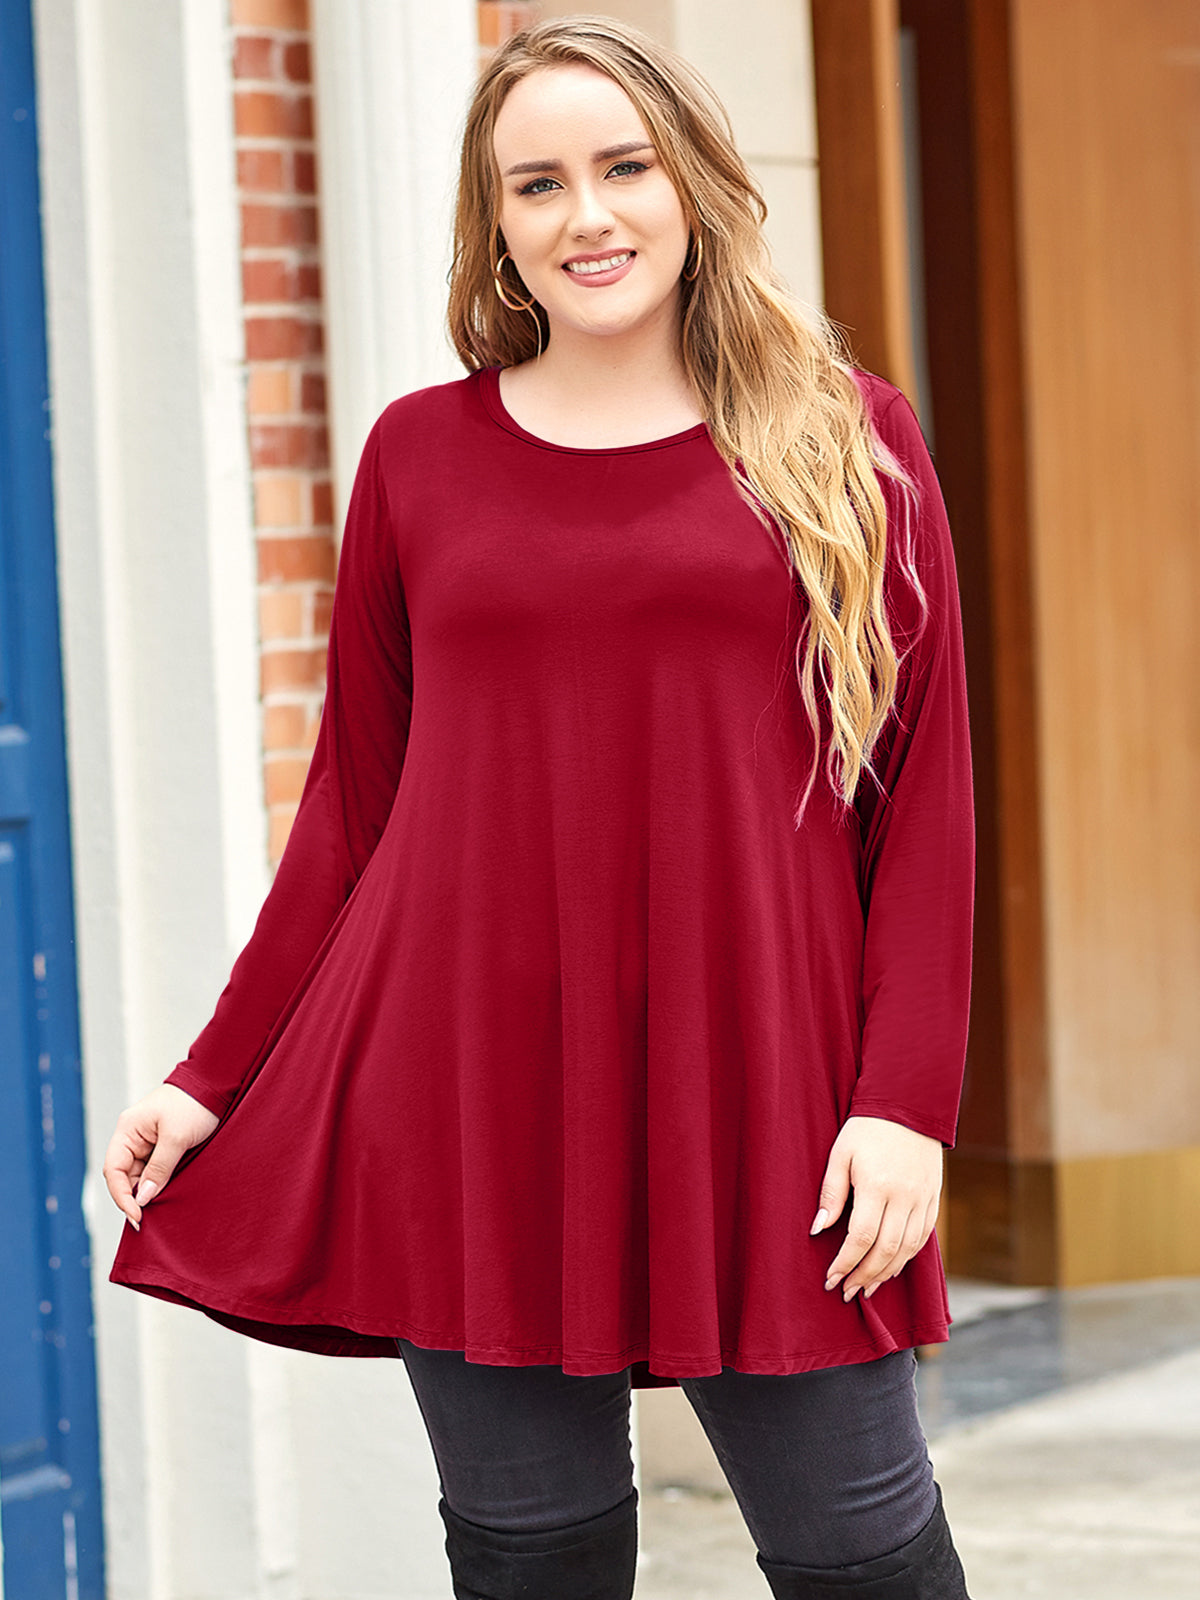 LARACE Plus Size Tunic Tops for Women Long Sleeve Swing Shirt Loose Fit Flowy Clothing for Leggings 8053